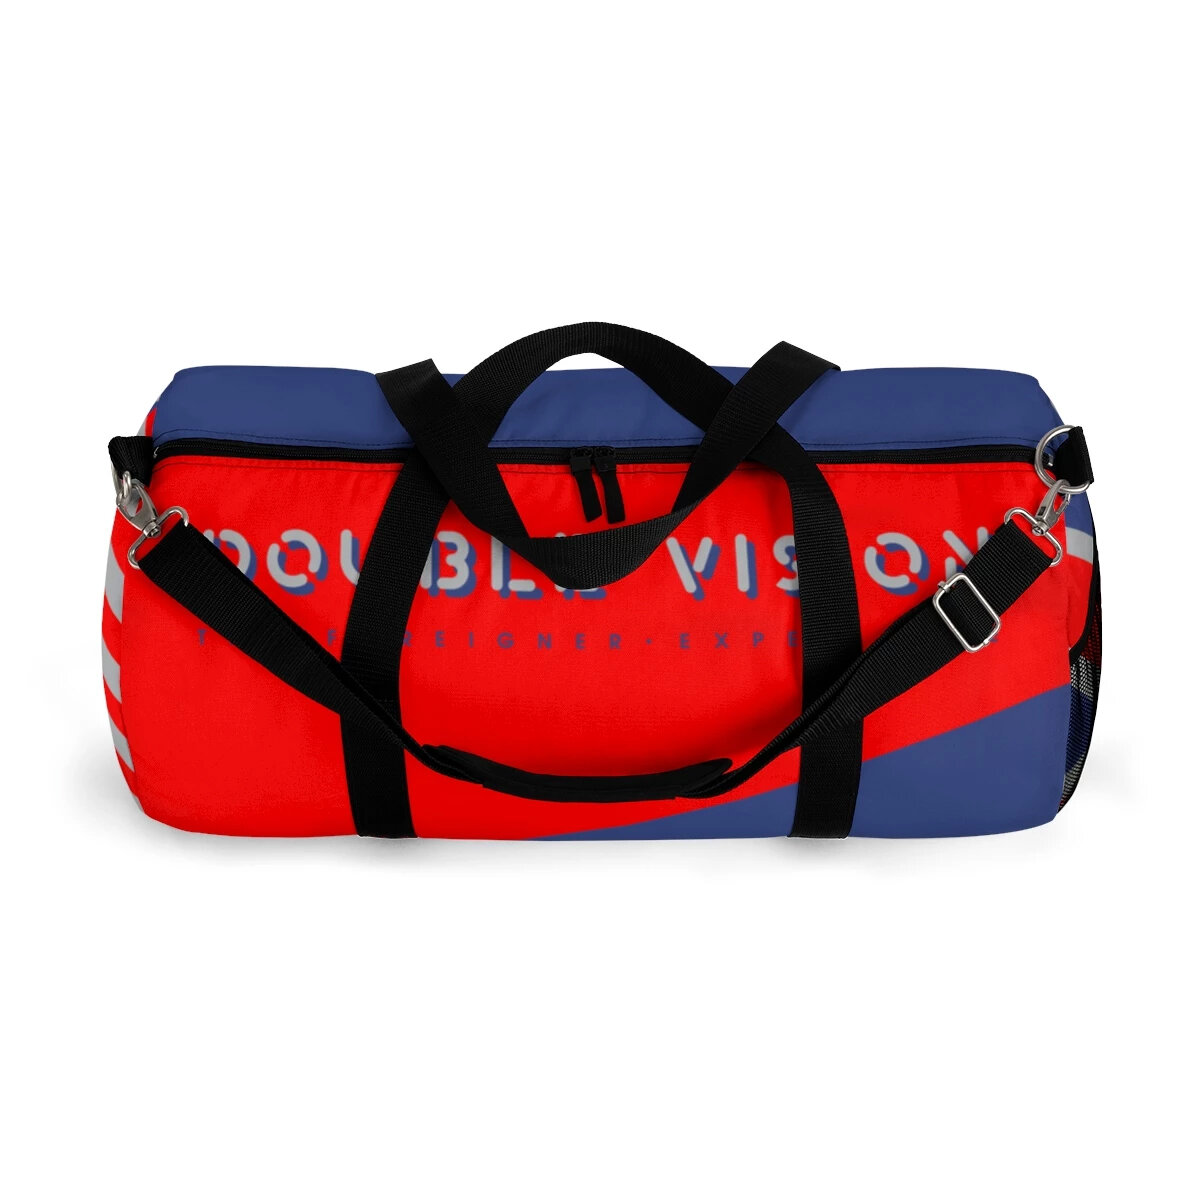 Double Vision . Red & Blue Duffel Bag